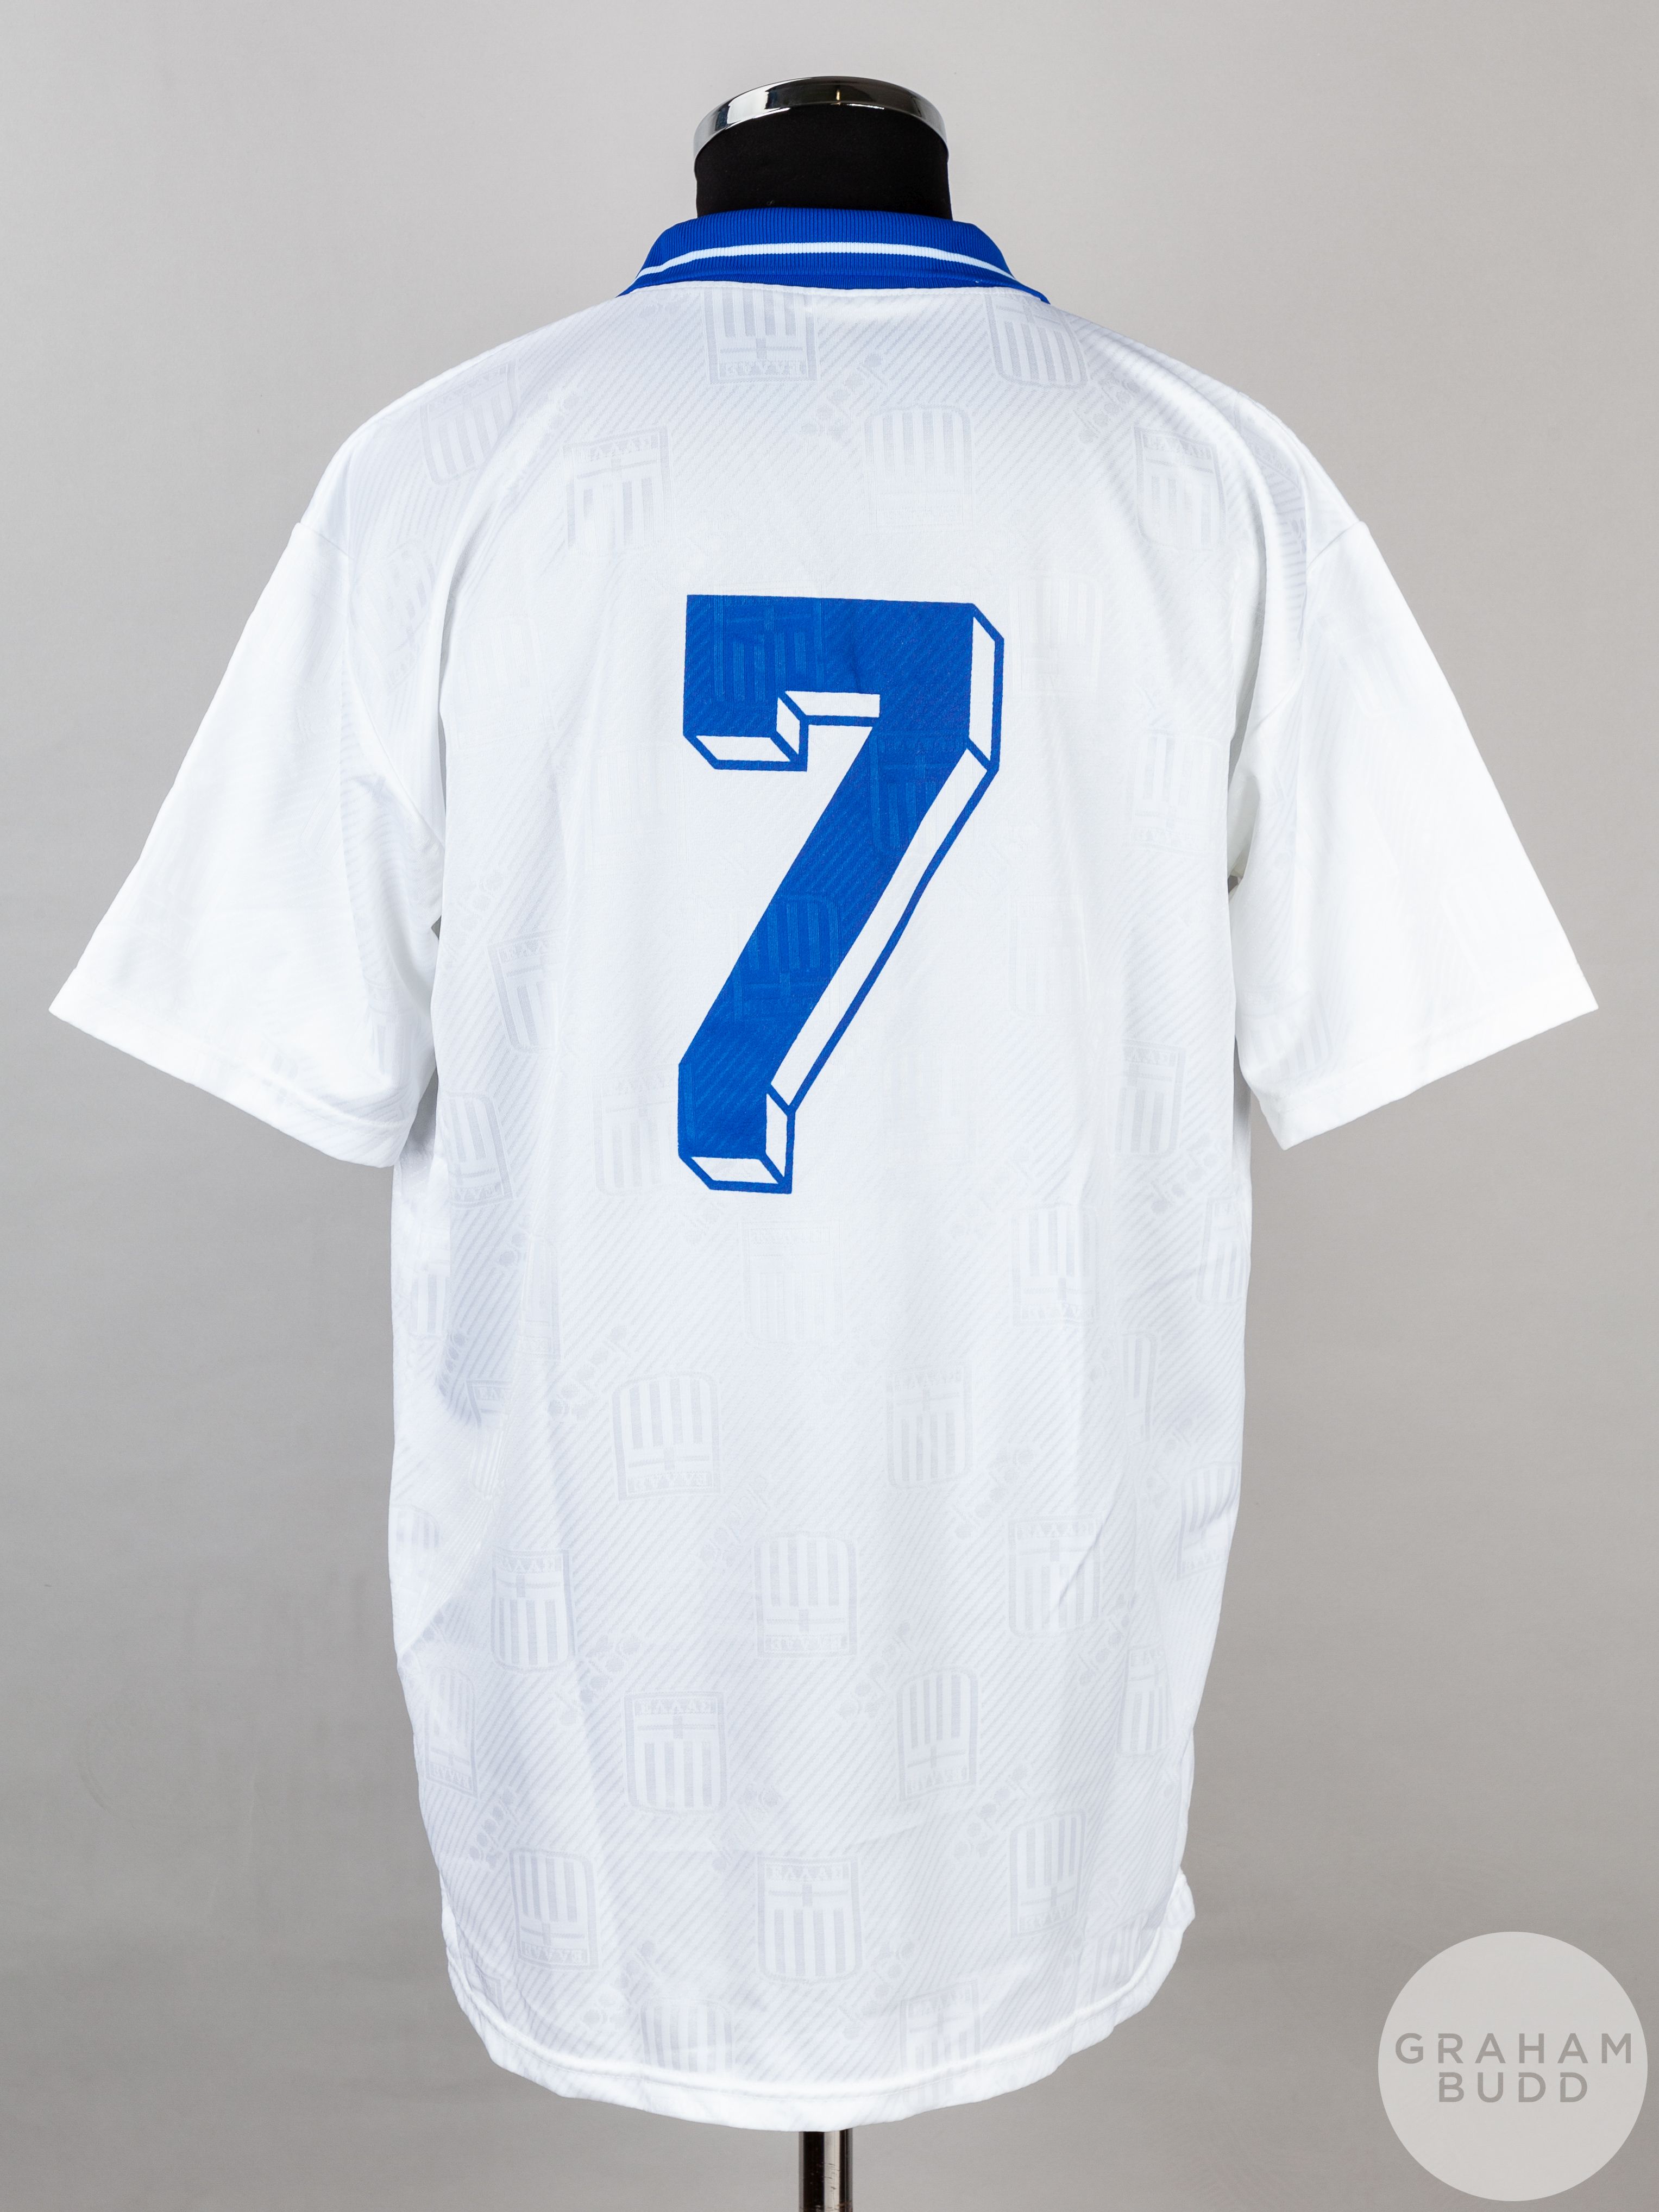 White and blue No.7 Greece short-sleeved shirt, - Image 2 of 5